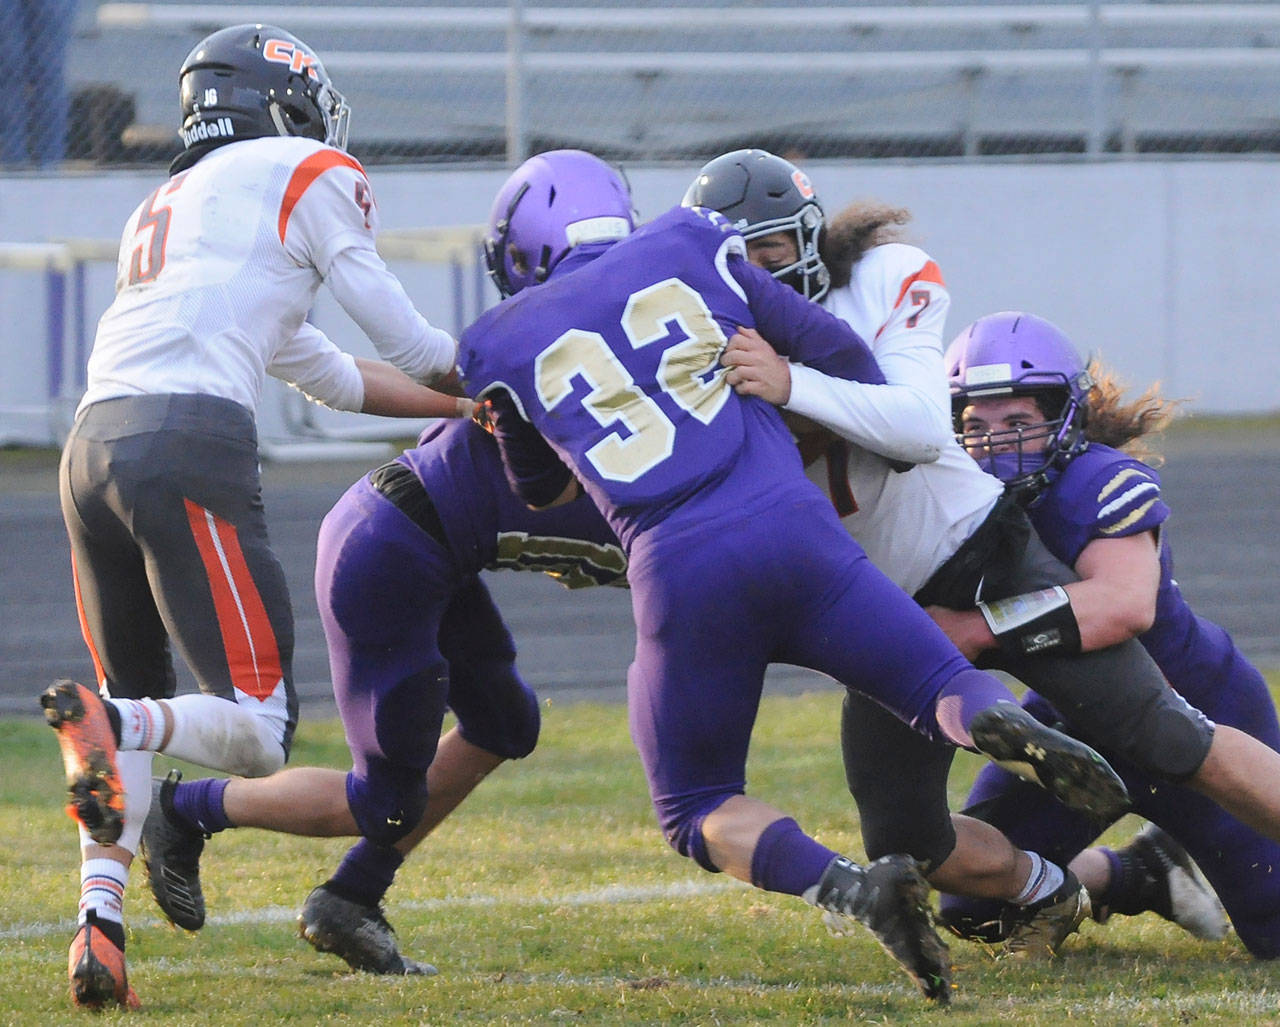 Sequim defenders Truman Nestor (center), Taig Wiker (right) and Garrett Hoesel (background) wrap up Central Kitsap quarterback Kalai Pasai in the first half of Sequim’s 38-22 win on March 18. Sequim had two key goalline stands against the Cougars. Sequim Gazette photo by Michael Dashiell